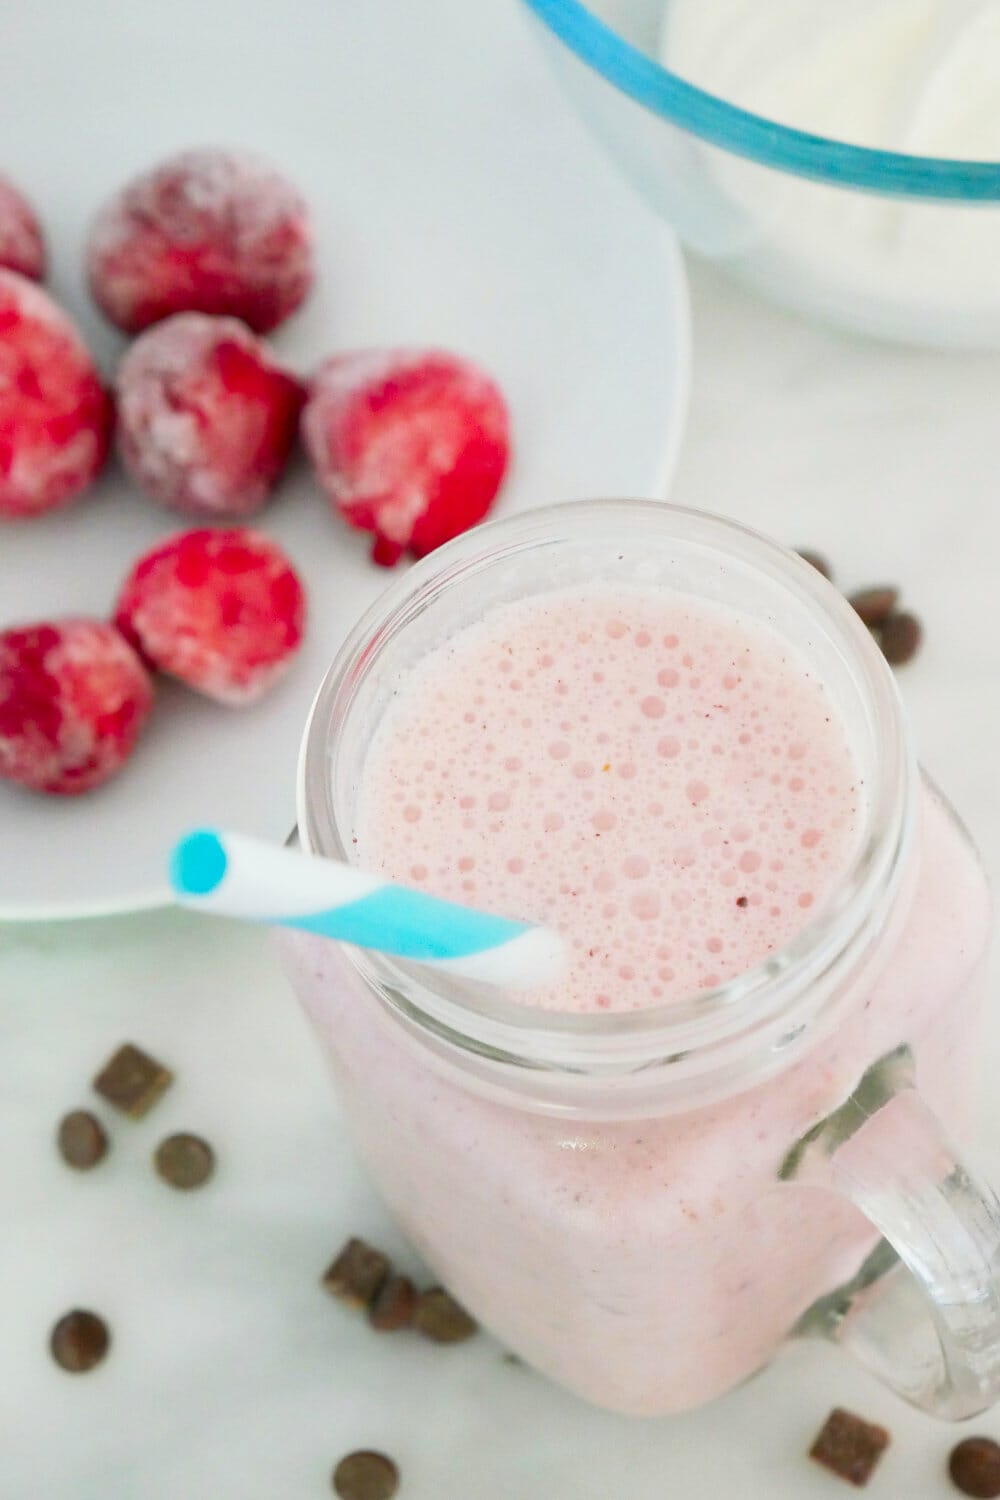 Strawberry coconut smoothie with chocolate (Keto friendly!) (+ tips!) via @thesmoothiesite